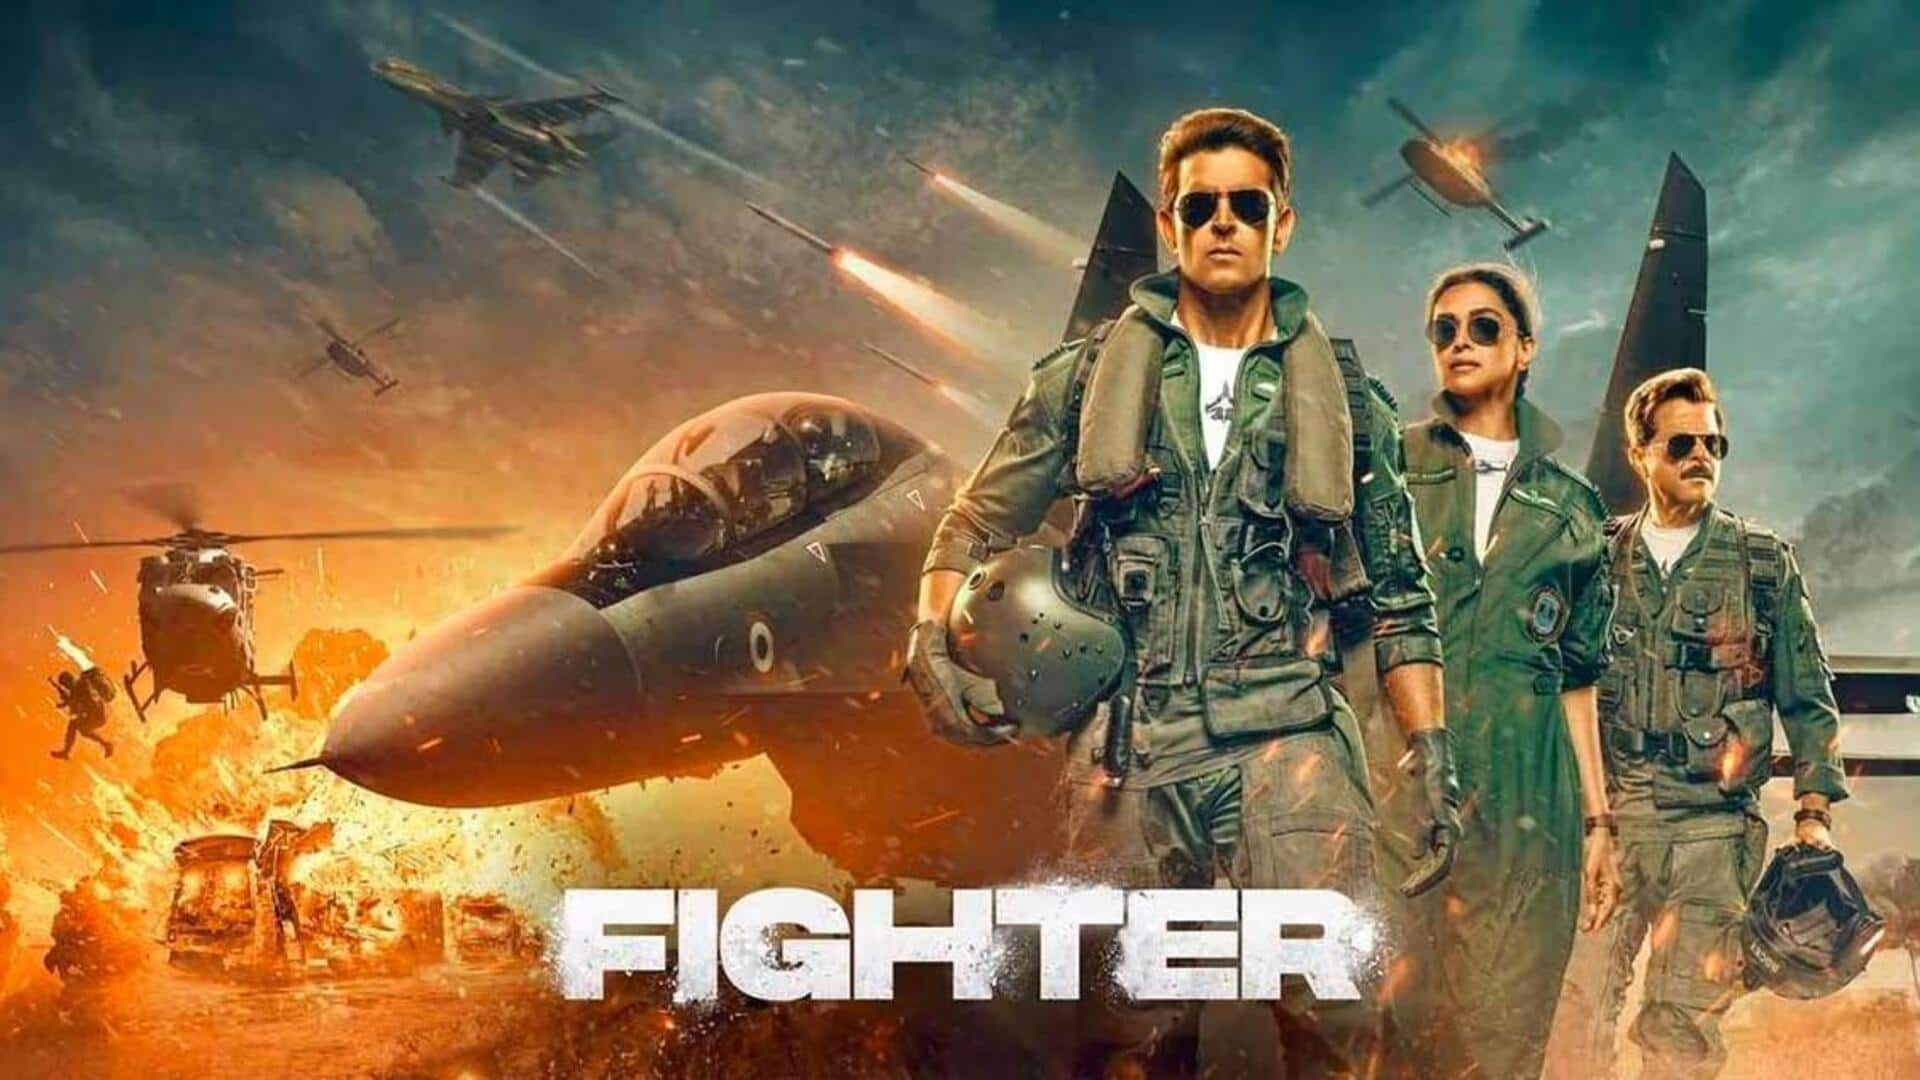 Know how much Siddharth Anand's 'Fighter' cast charged for it